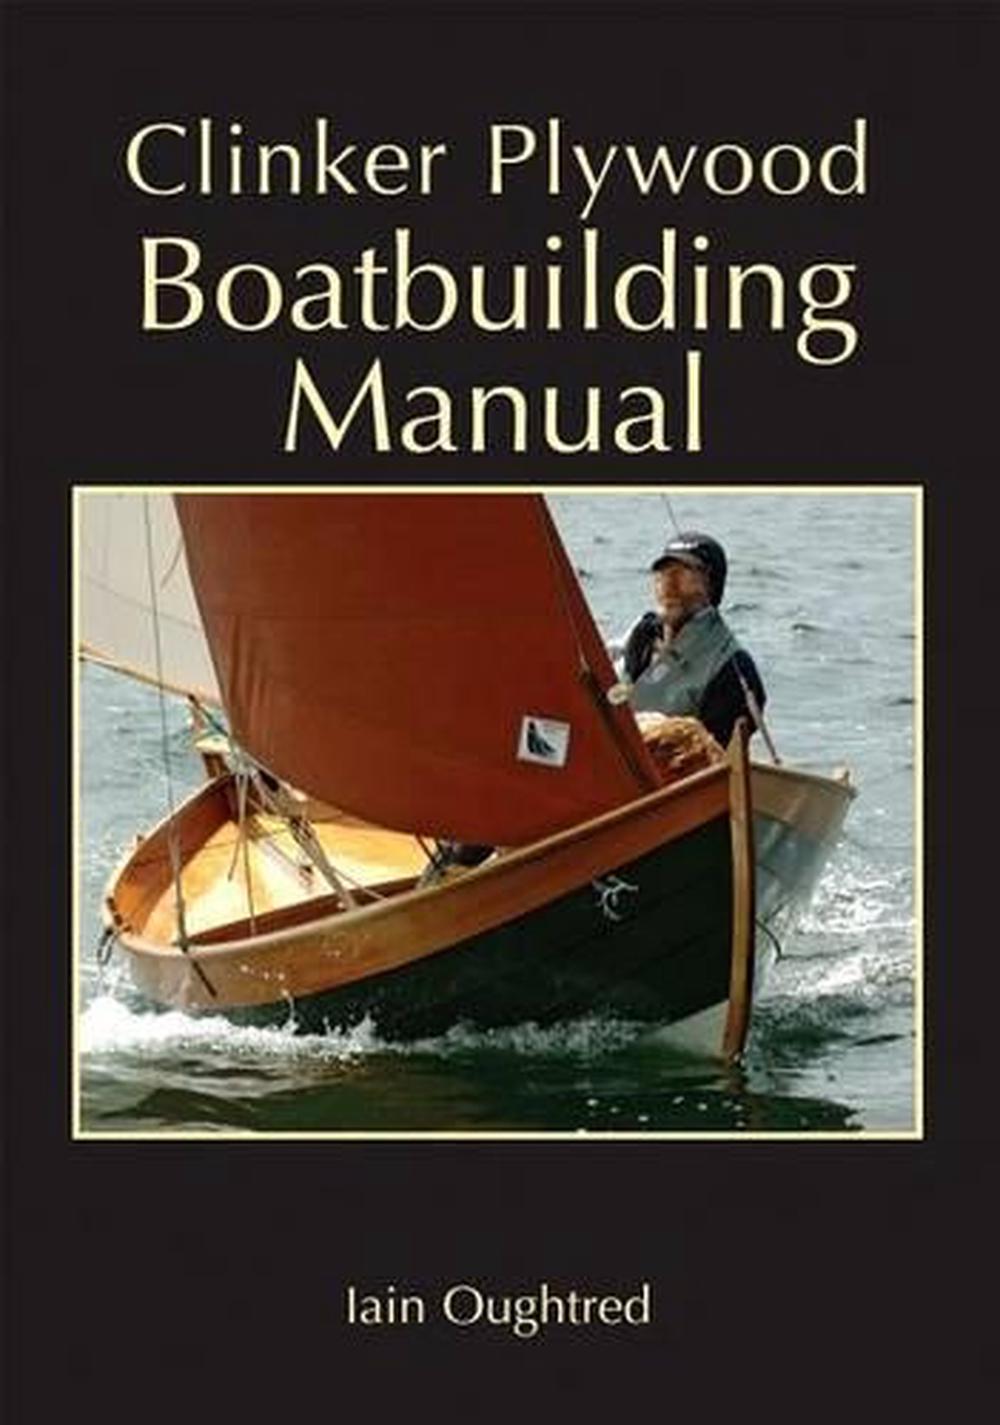 Clinker Plywood Boatbuilding Manual by Iain Oughtred 